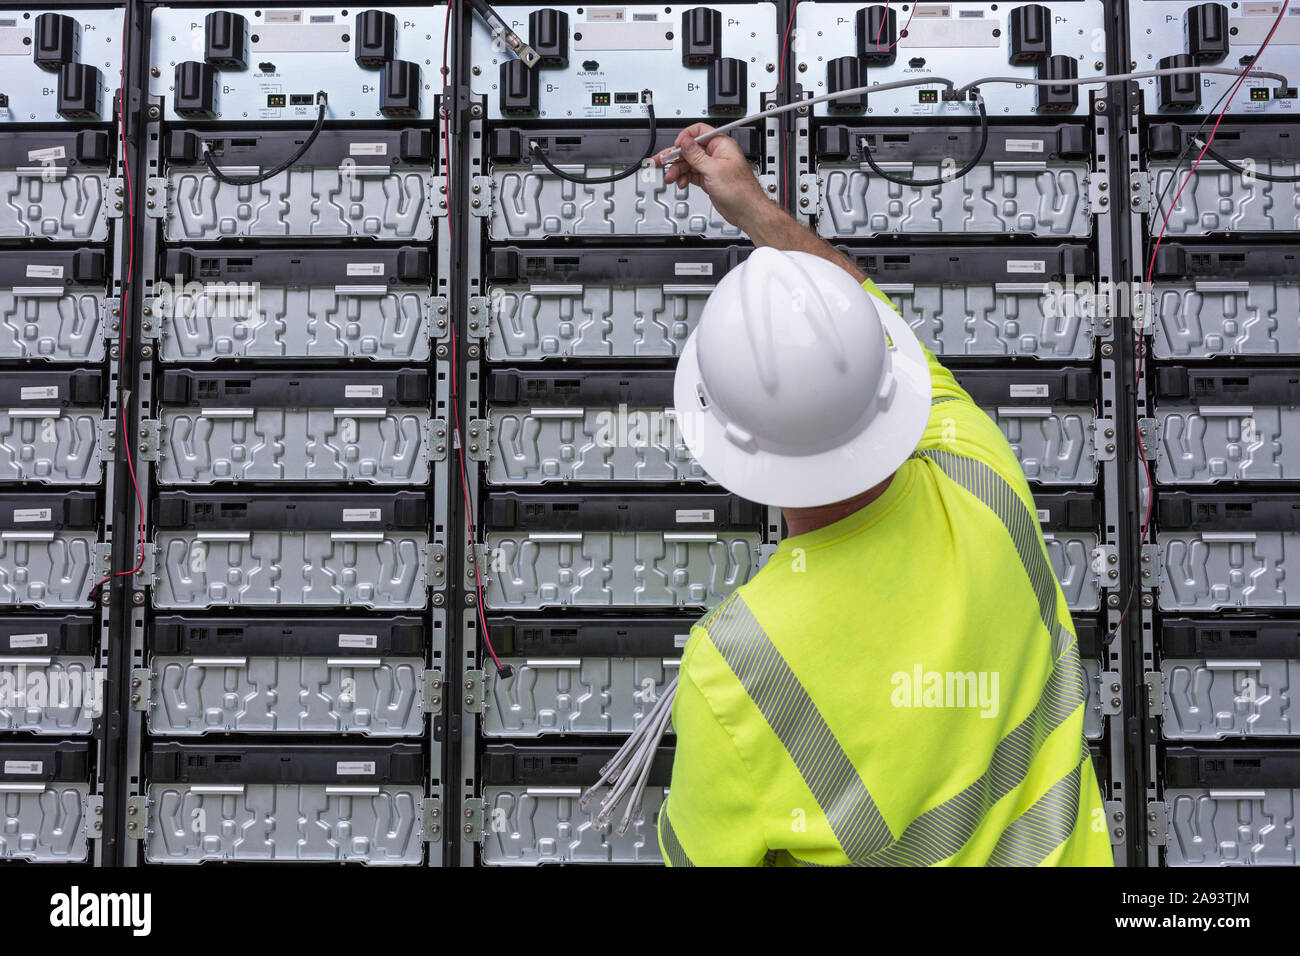 Engineer connecting energy storage batteries for back up power to an electric power plant Stock Photo